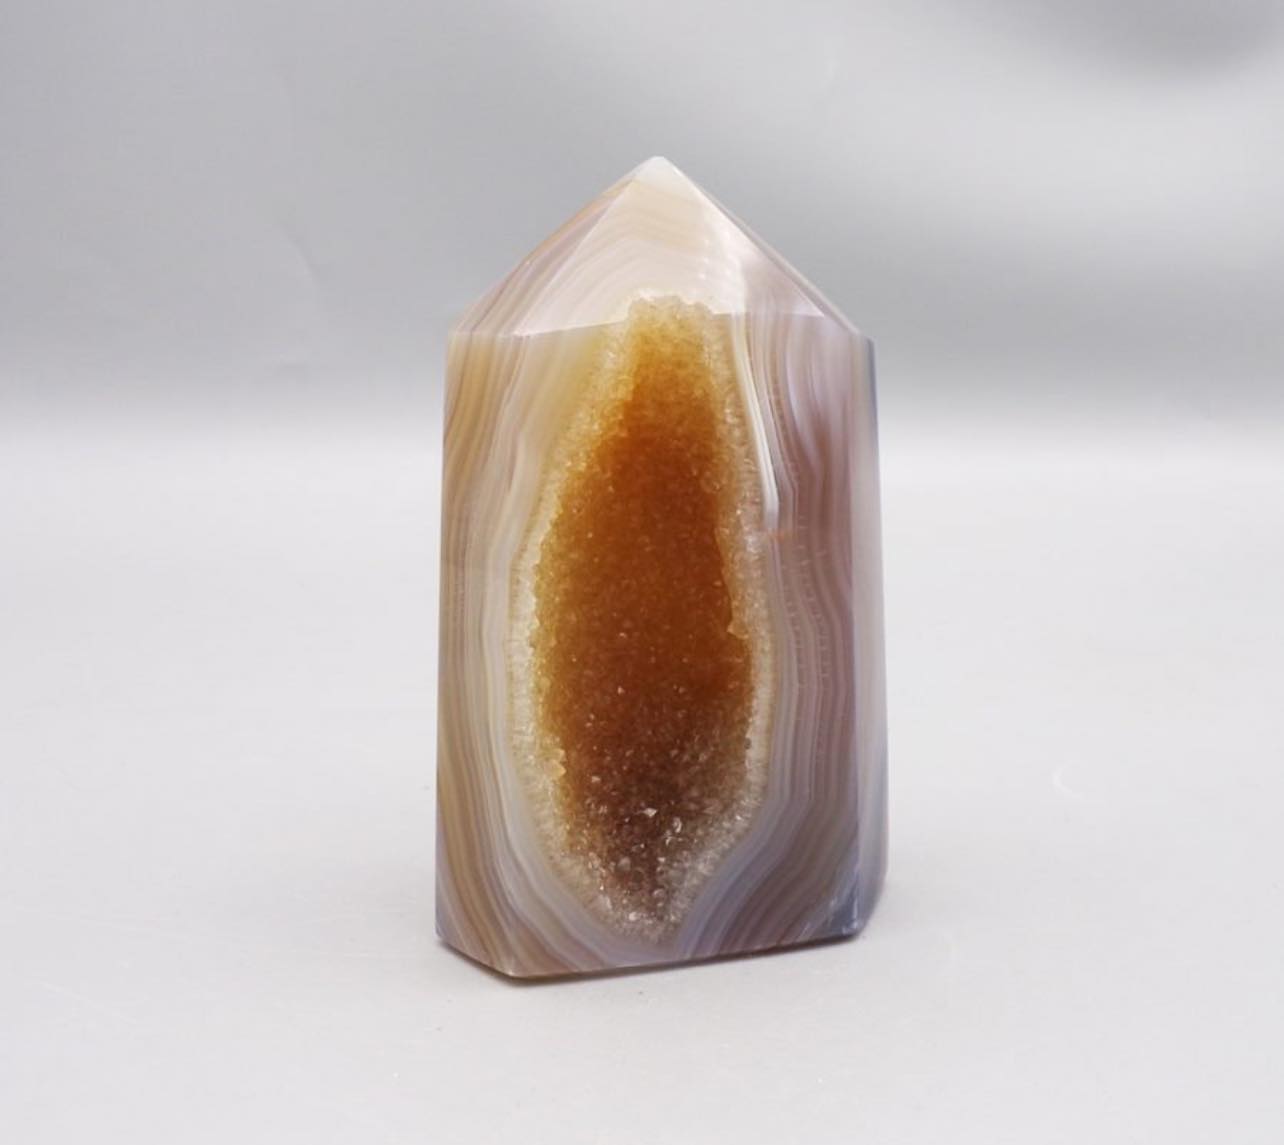 Agate Geode Polished Point